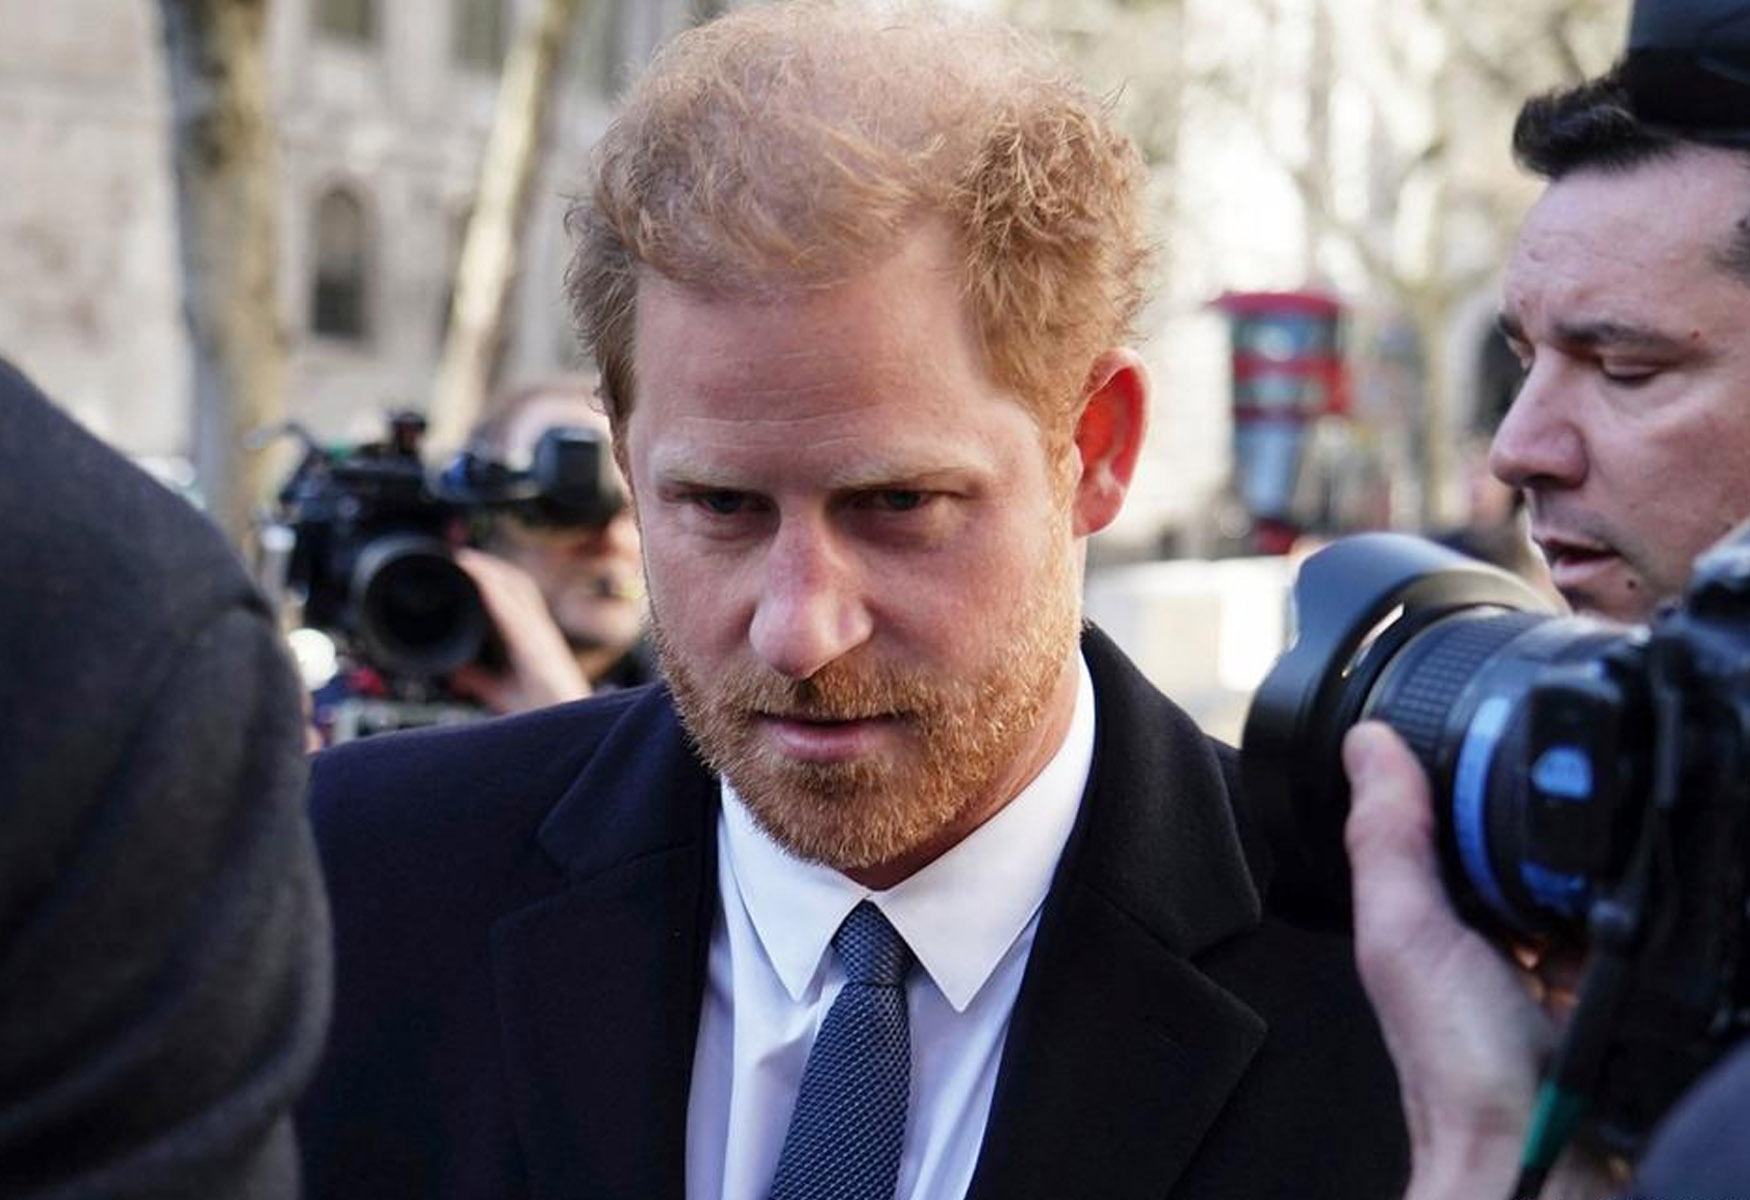 Prince Harry Emerges Victorious In Phone Hacking Case Against UK Newspaper